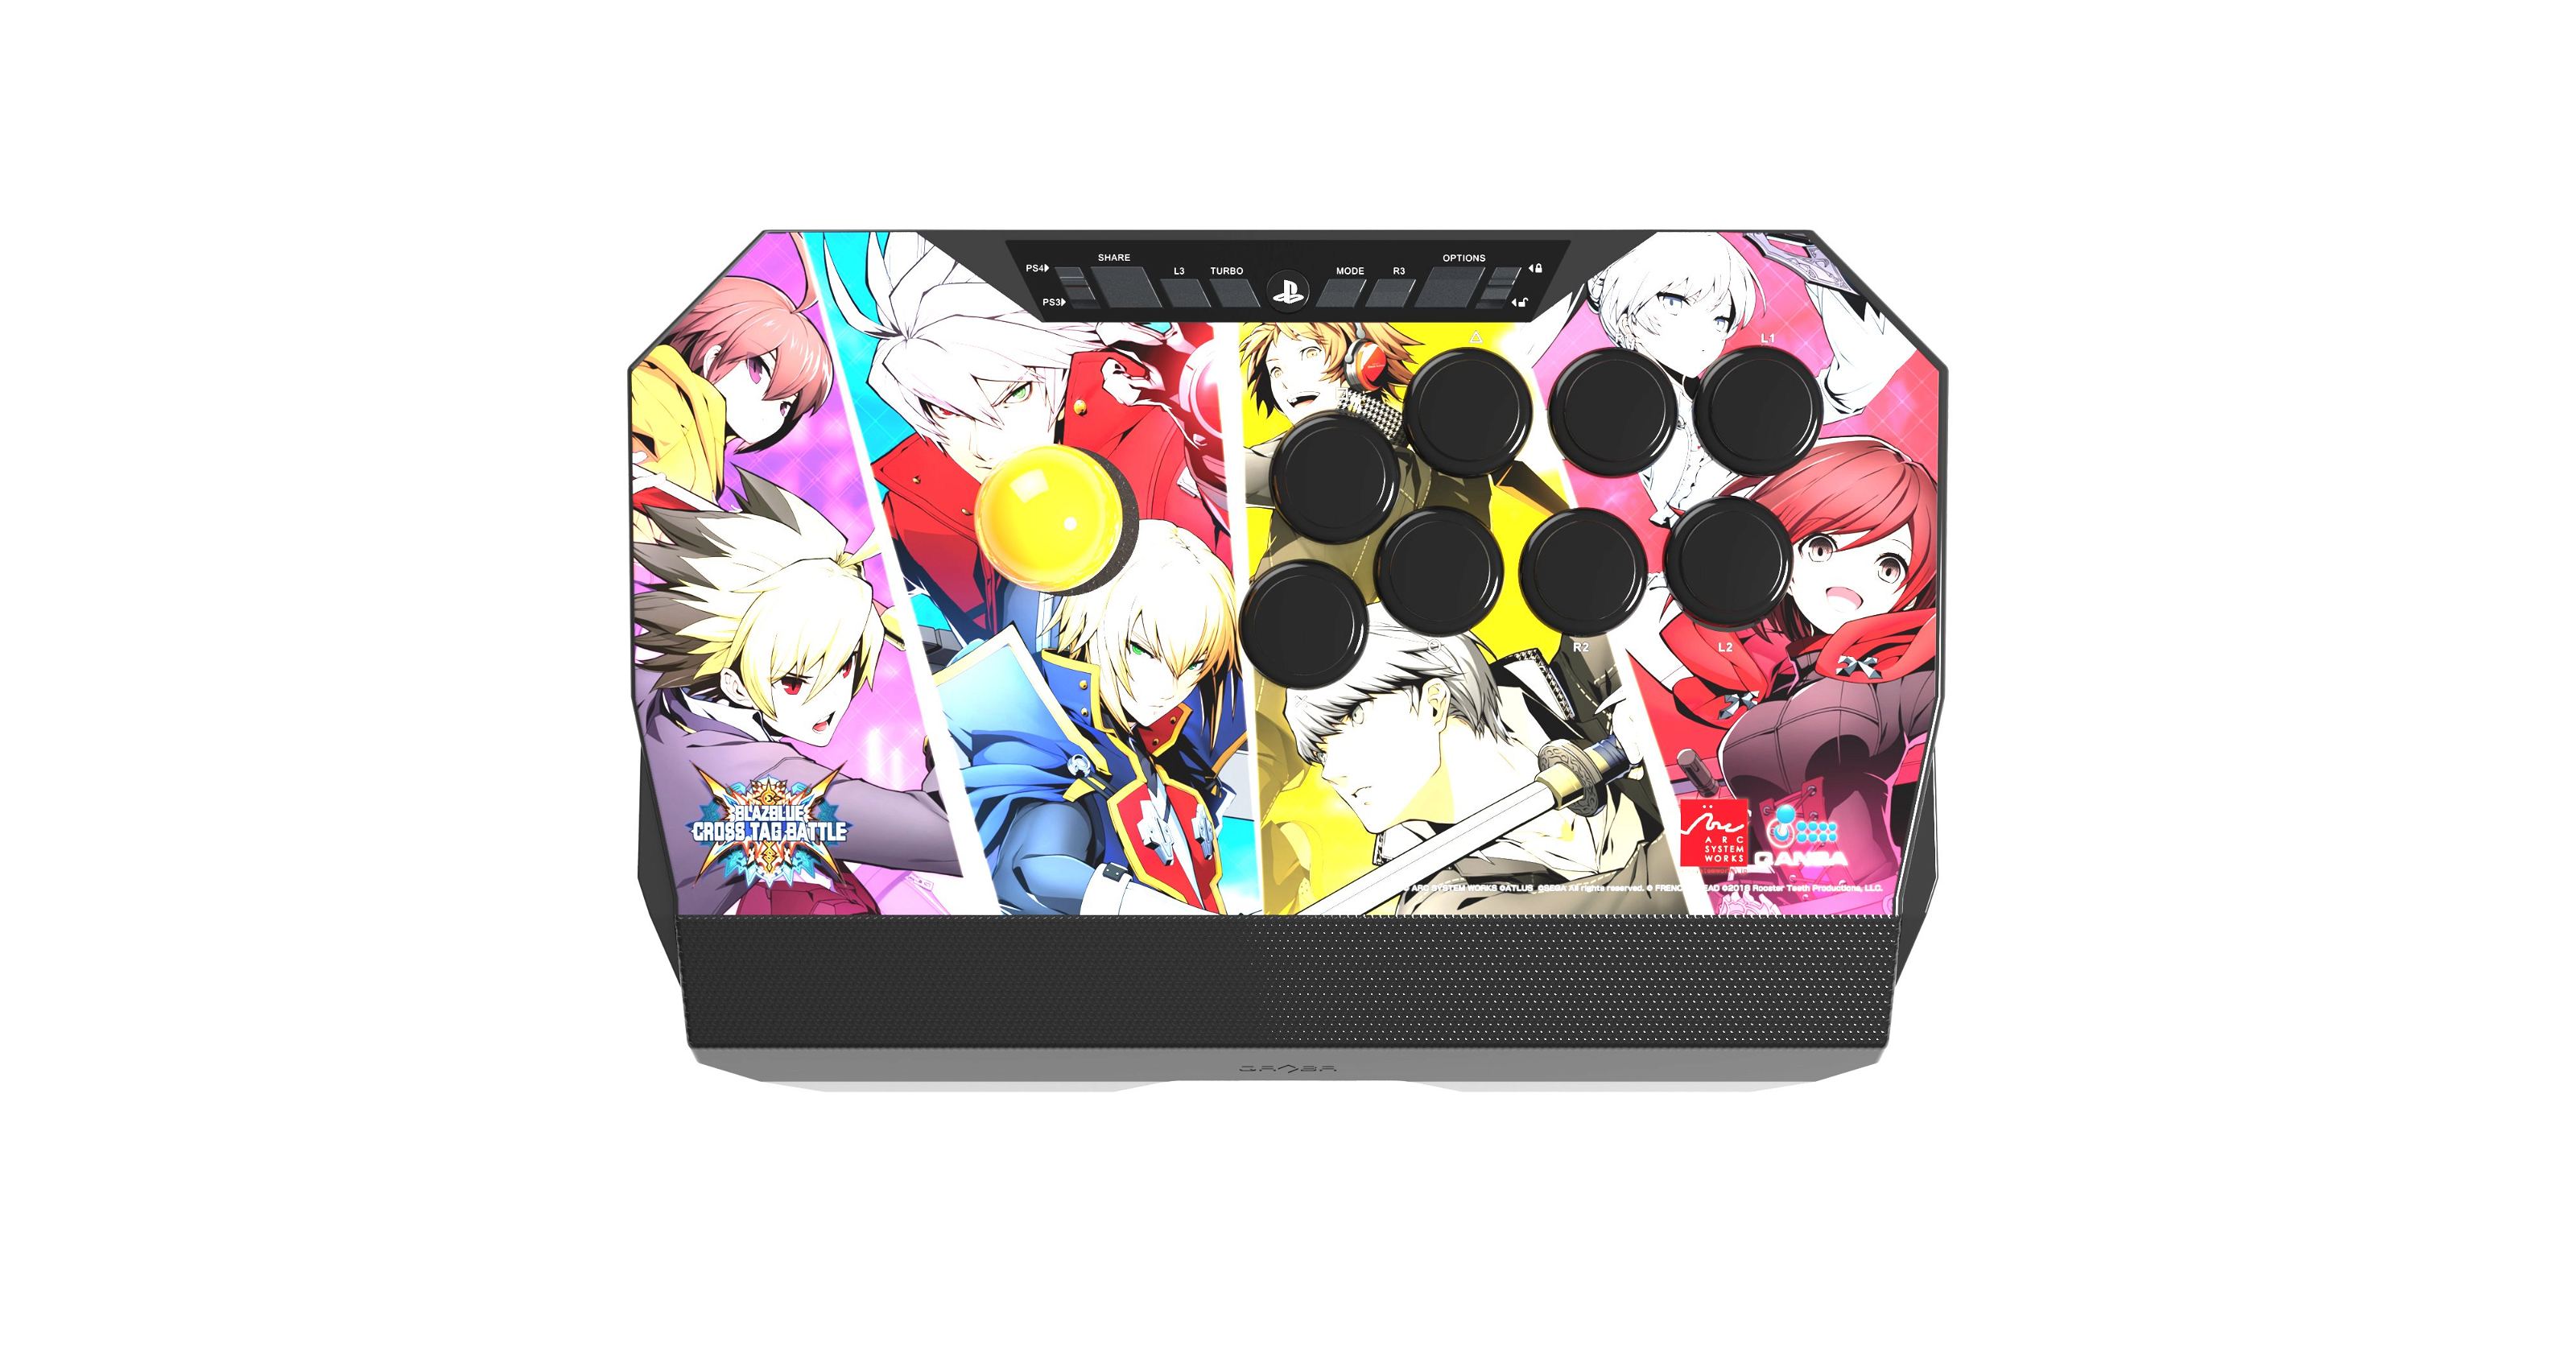 Blazblue Cross Tag Battle Drone Arcade Joystick for PS4/PS3/PC for 